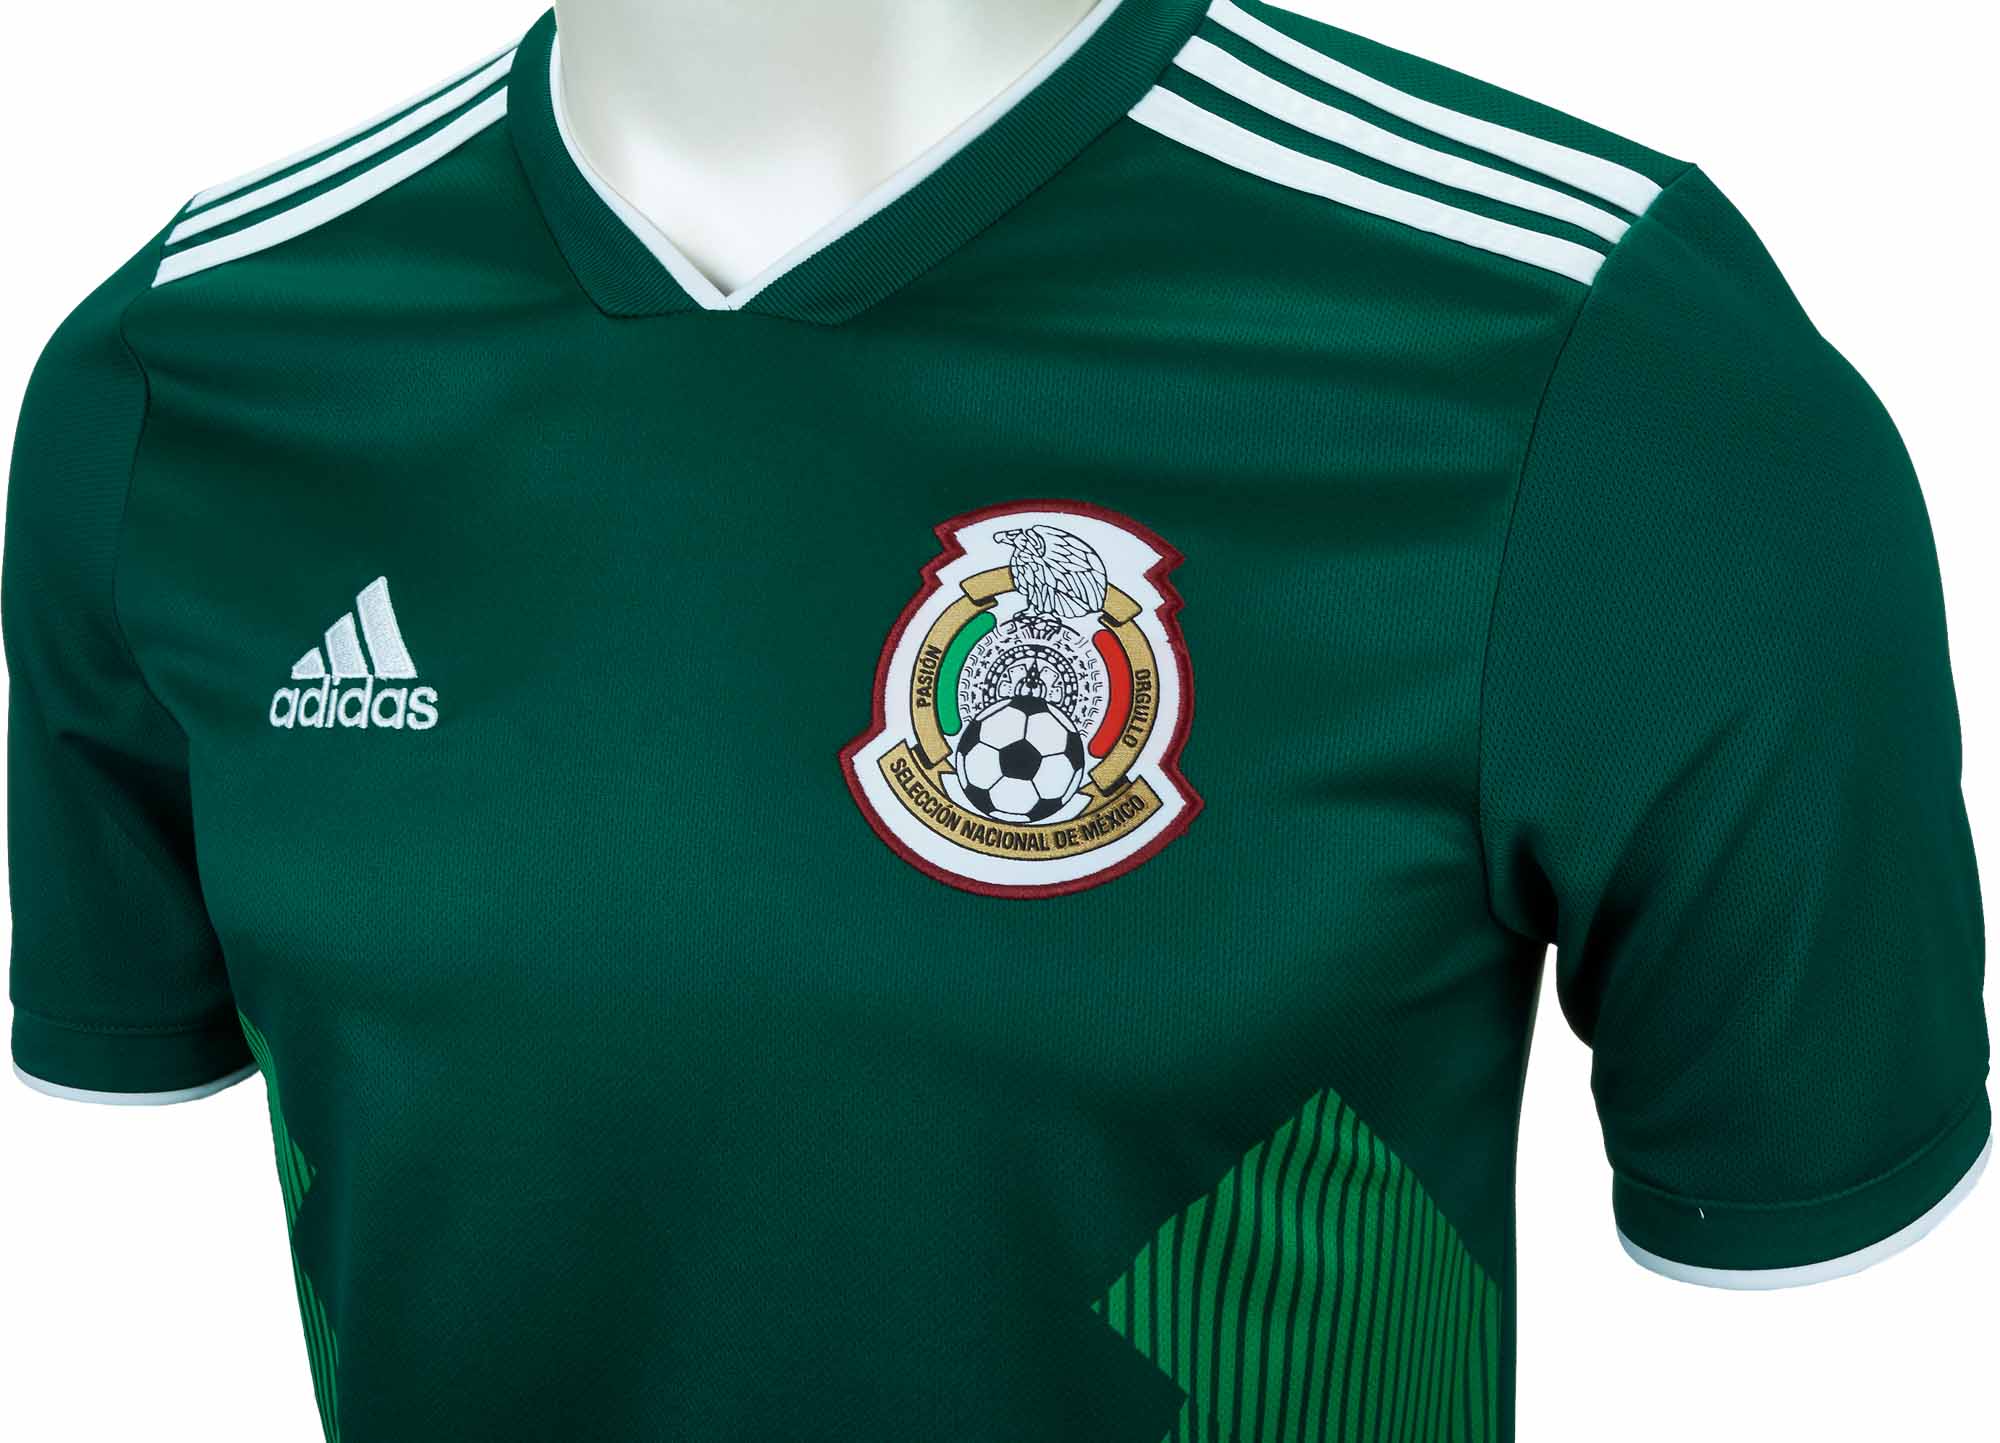 toddler mexico soccer jersey